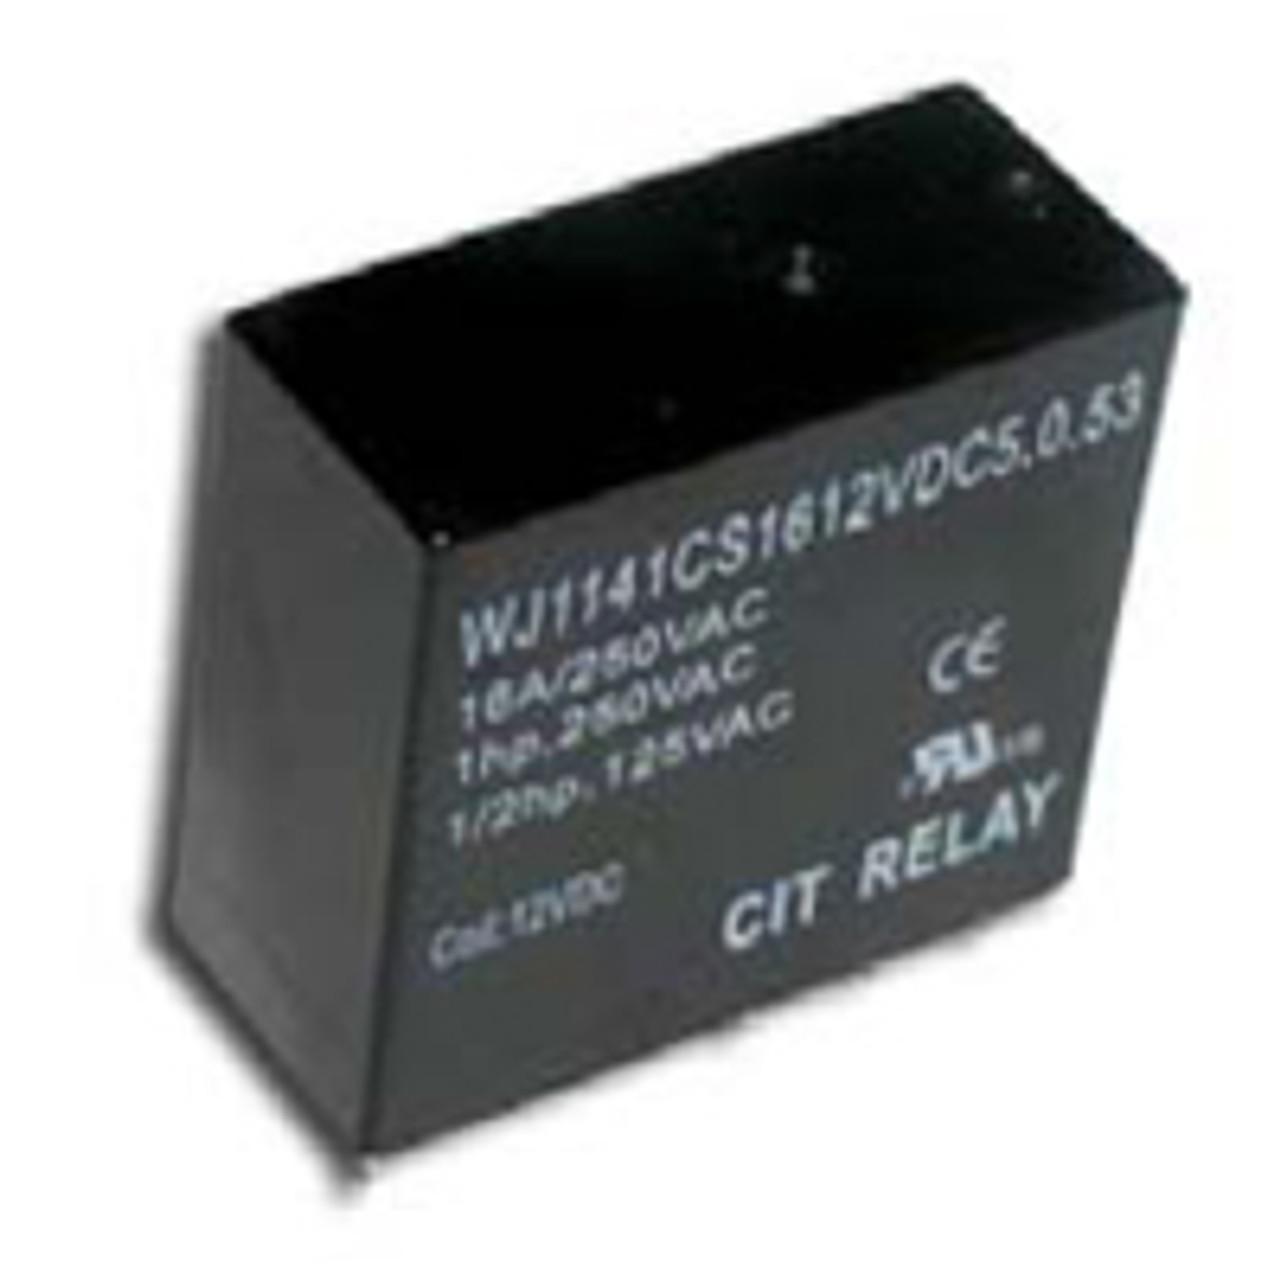 CIT Relay and Switch J1141AS105VDC3.5.53 Power Relays